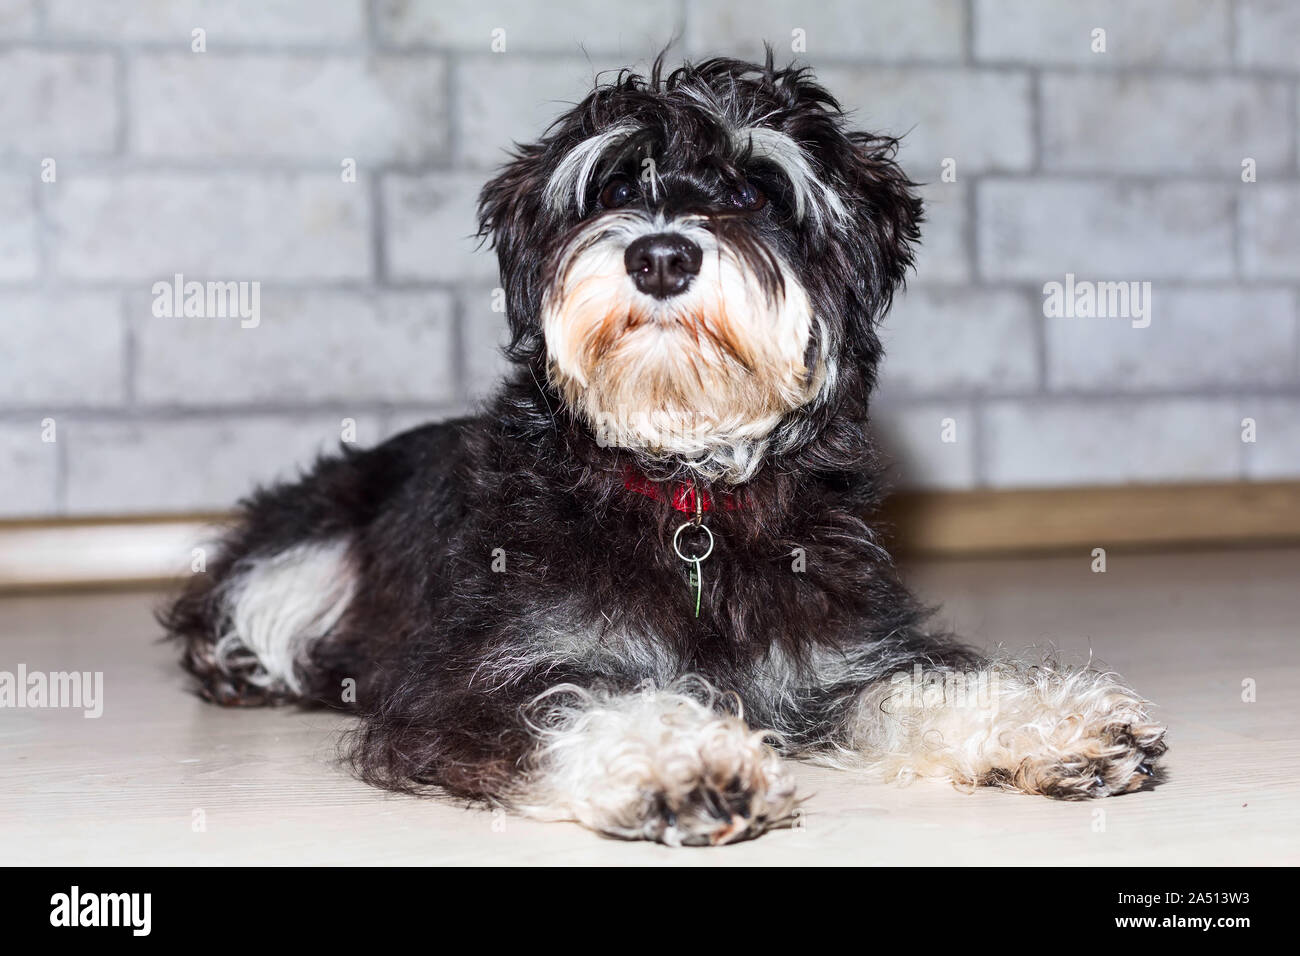 Miniature schnauzer cute black and silver puppy lying, close-up portrait at home Stock Photo